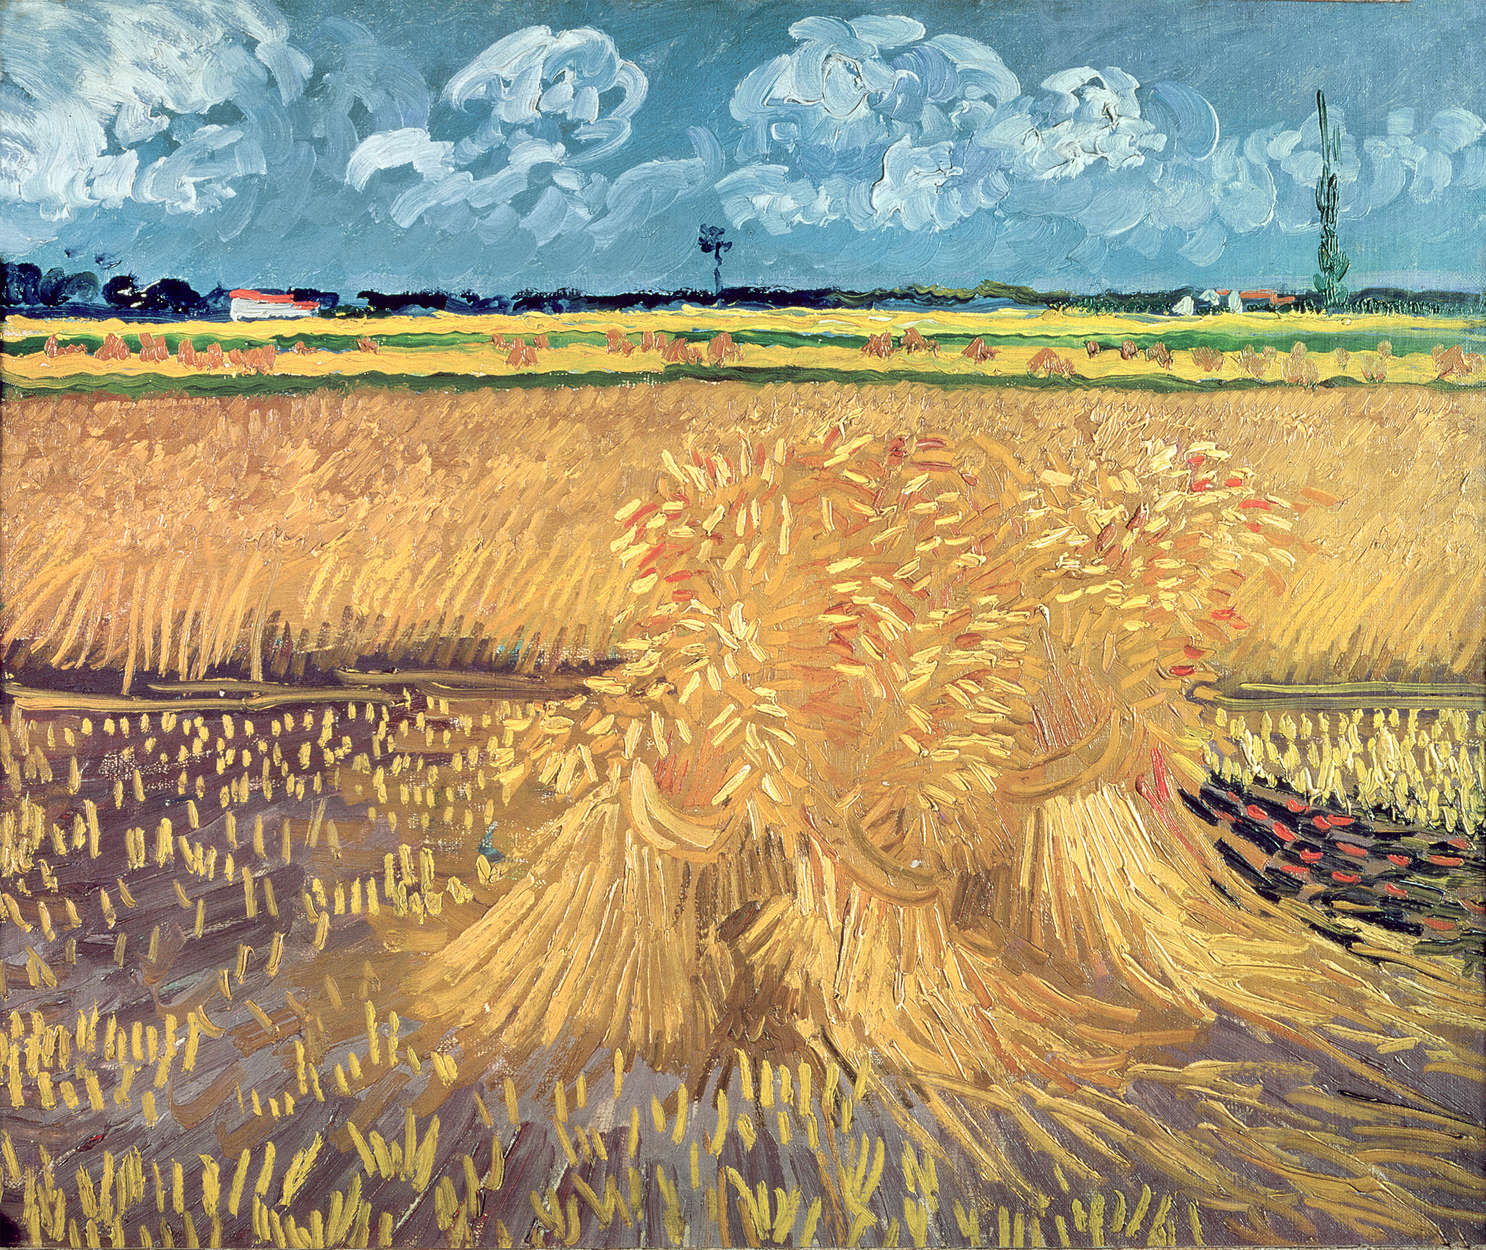             Photo wallpaper "Crows over wheat field" by Vincent van Gogh
        